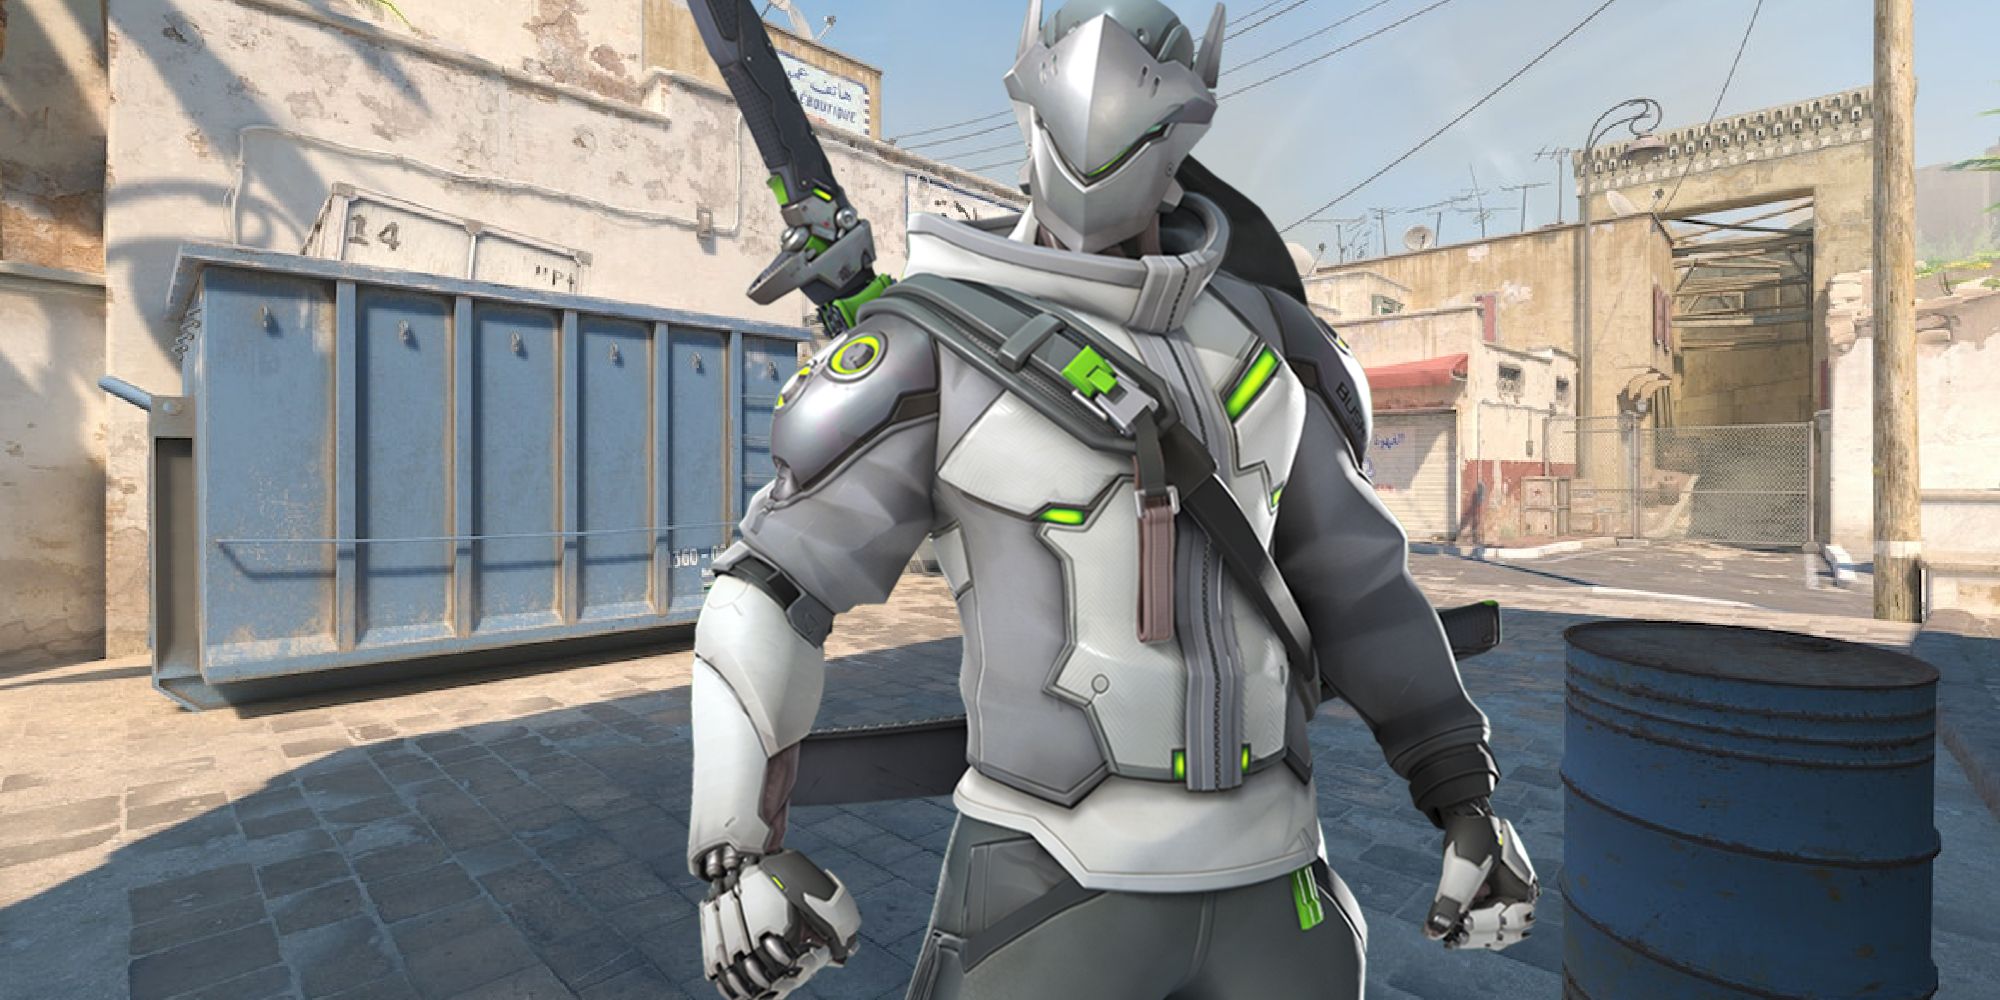 Genji from Overwatch 2 standing in Counter-Strike 2's revamped Dust 2 map